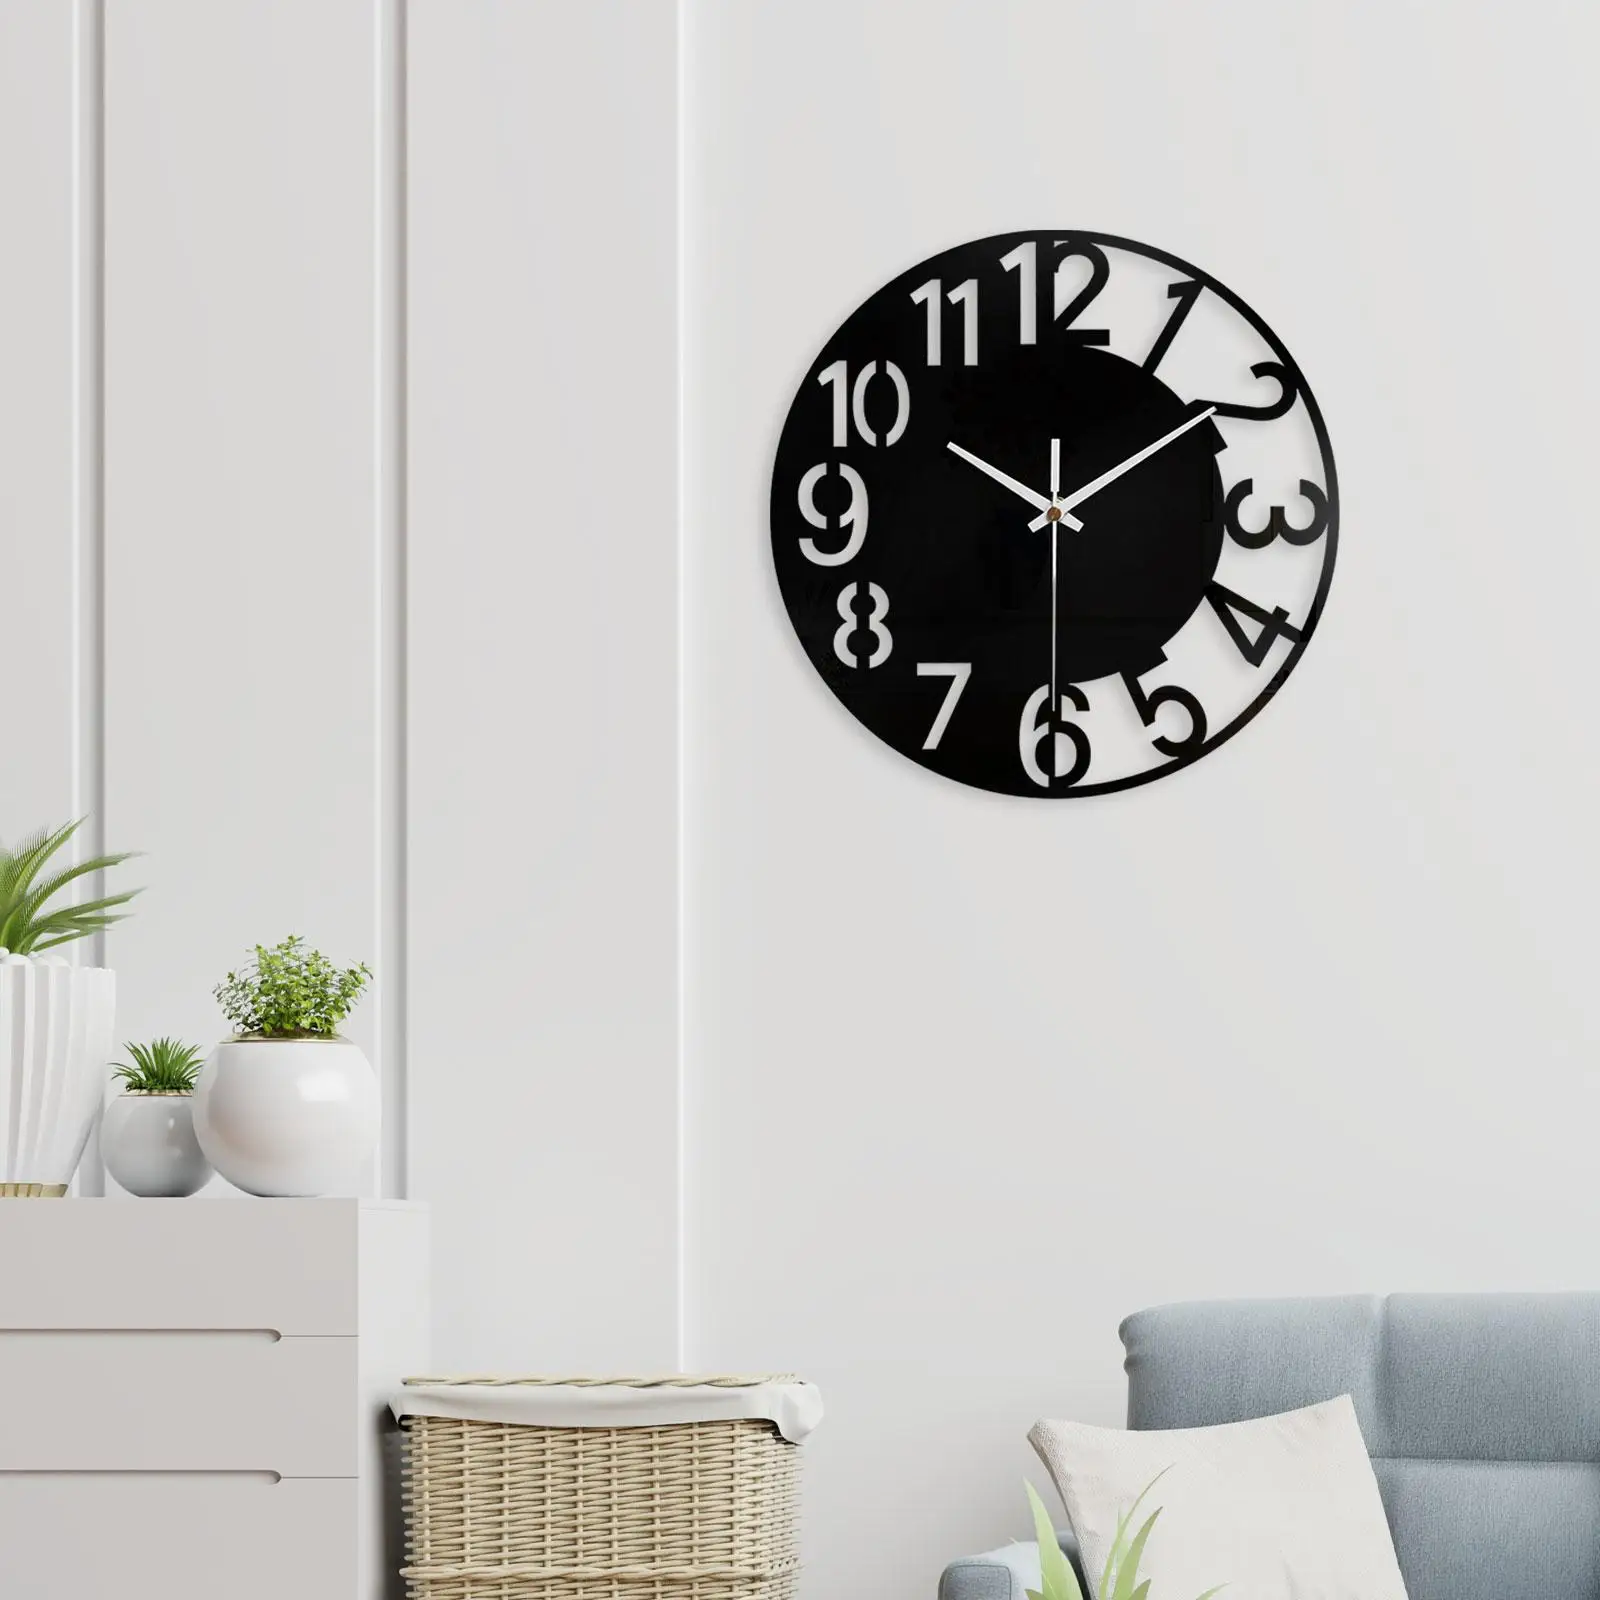 Acrylic Wall Clock/ Big Wall Clock /Festival Gift /Modern Style/ Decorative Clock Round Wall Clock for Living Room Home Decor